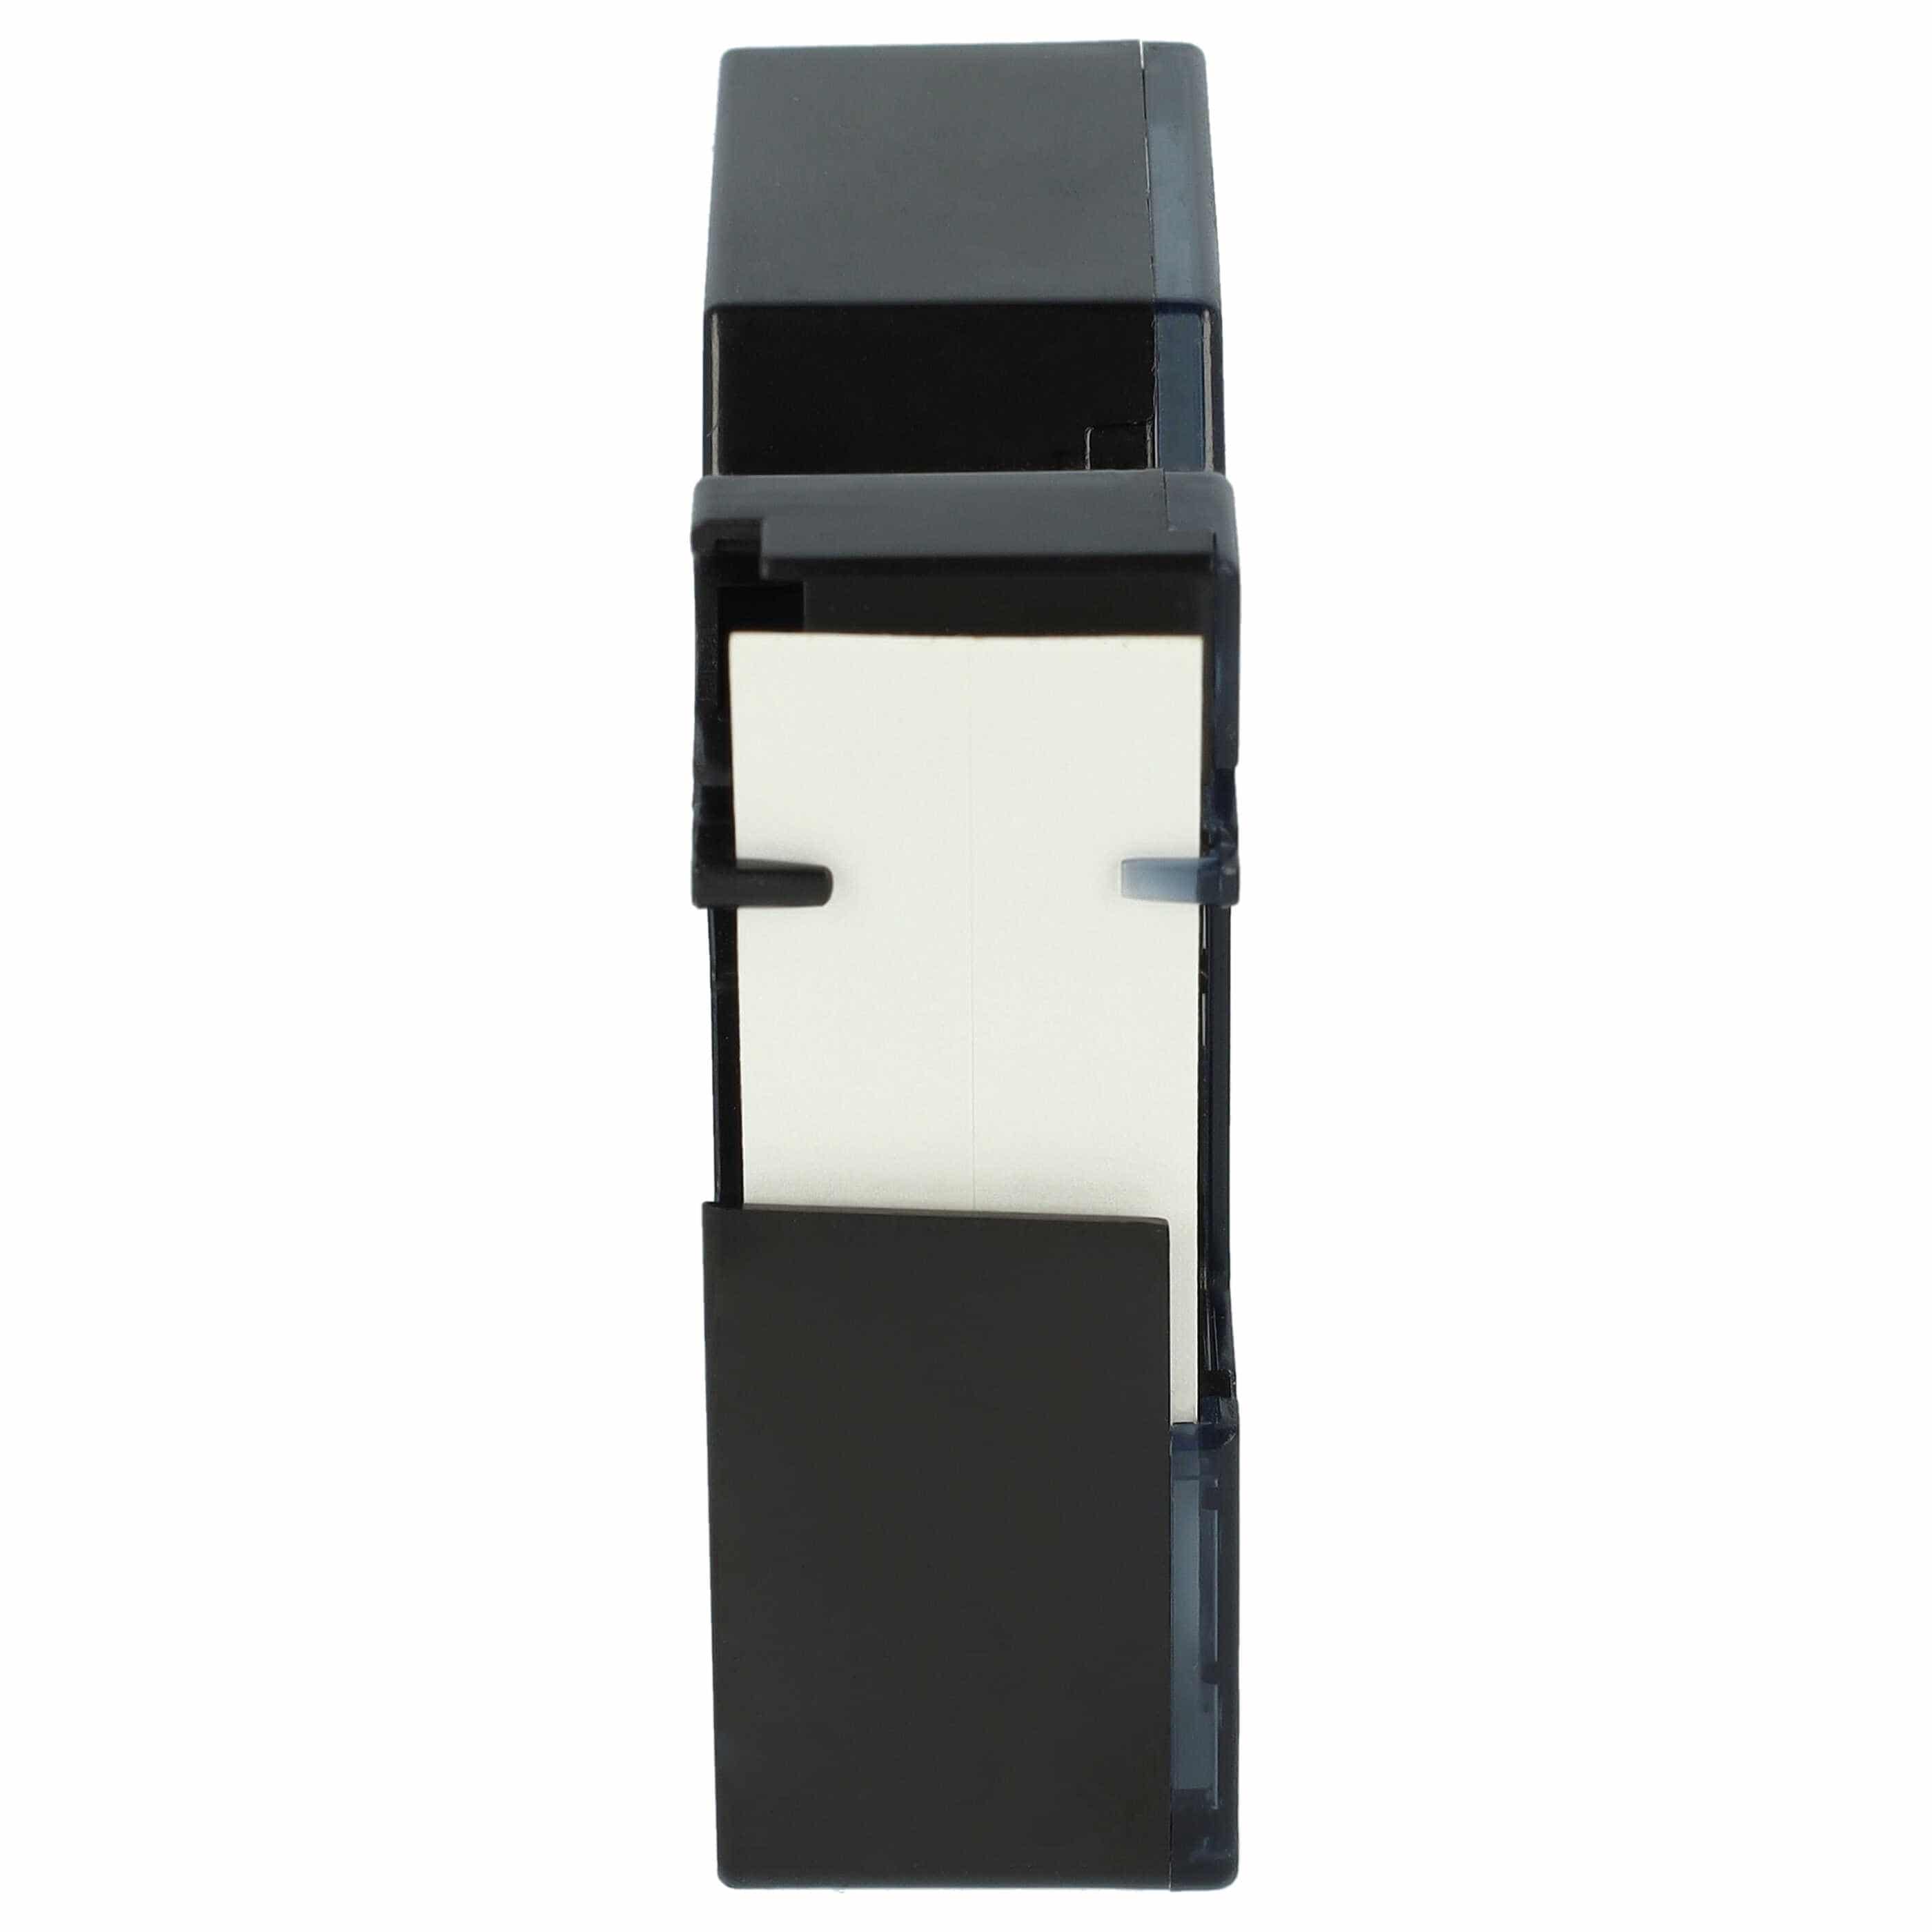 Label Tape as Replacement for Dymo 18484 - 19 mm Black to White, Polyester